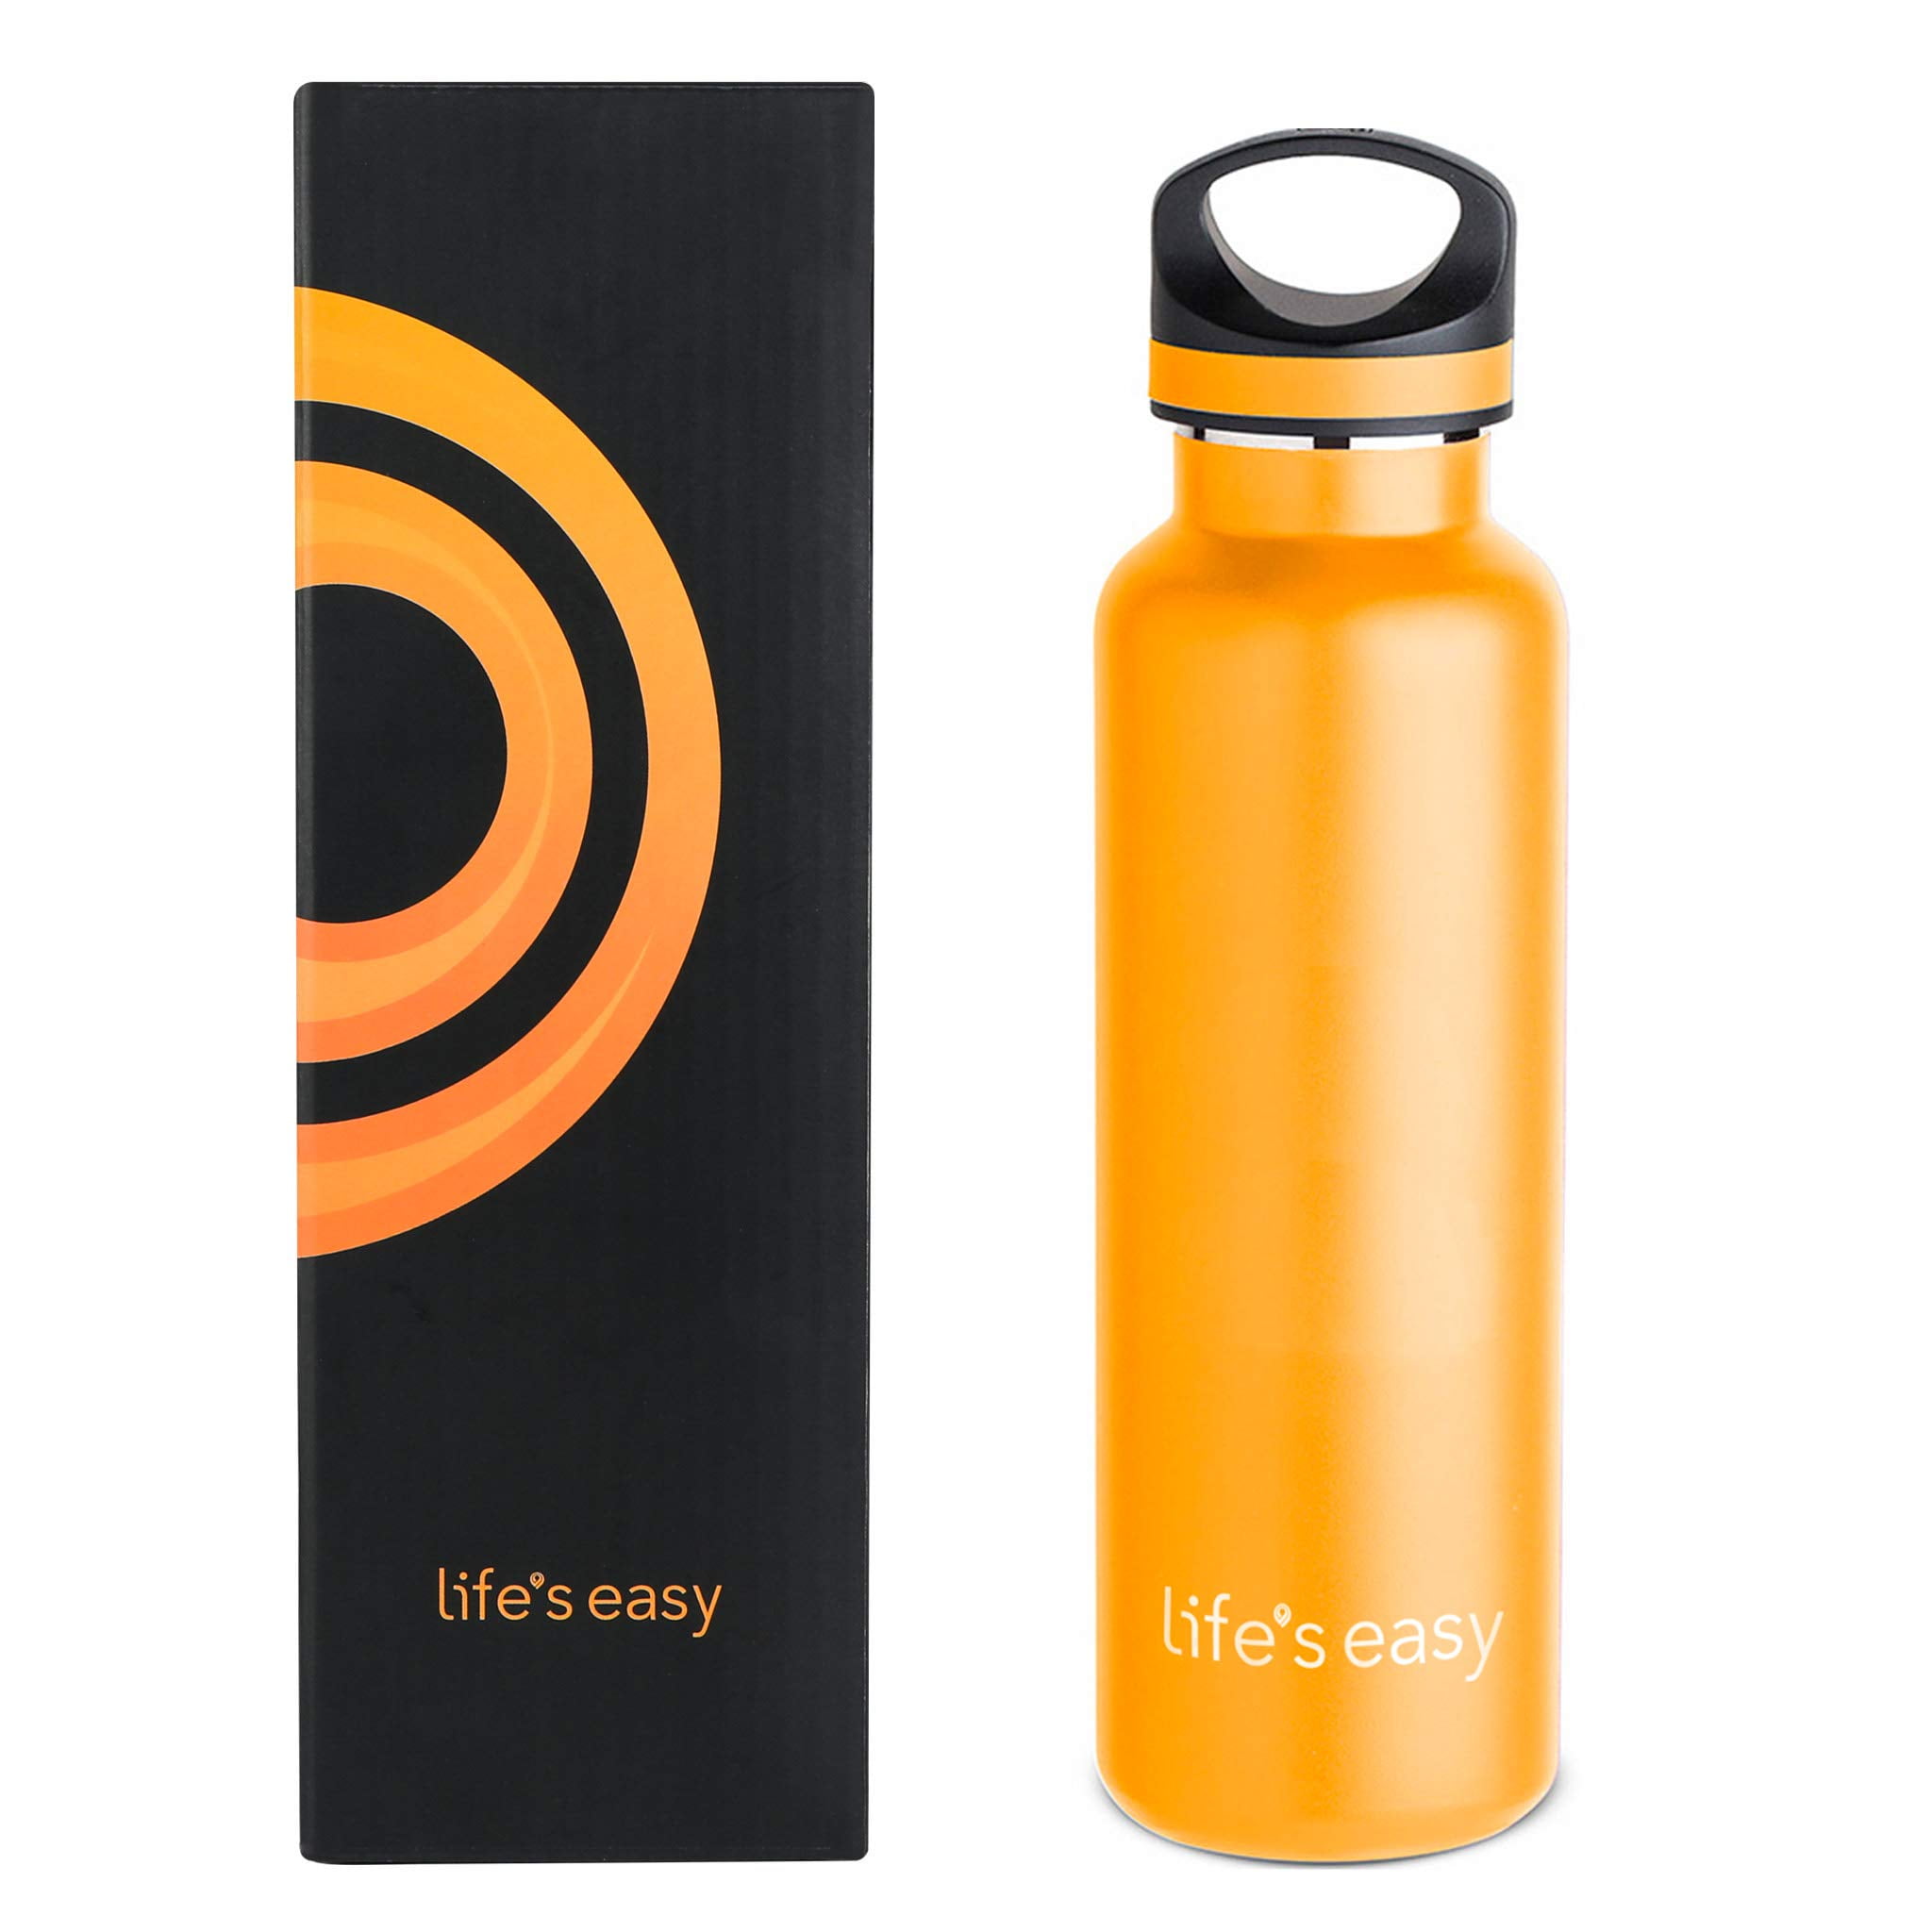 HYDY Vacuum Insulated Thermal Water Bottle 20 oz - BPA Free Stainless Steel - Eco Friendly - Ideal for Exercise, The Office and Travel - Modern